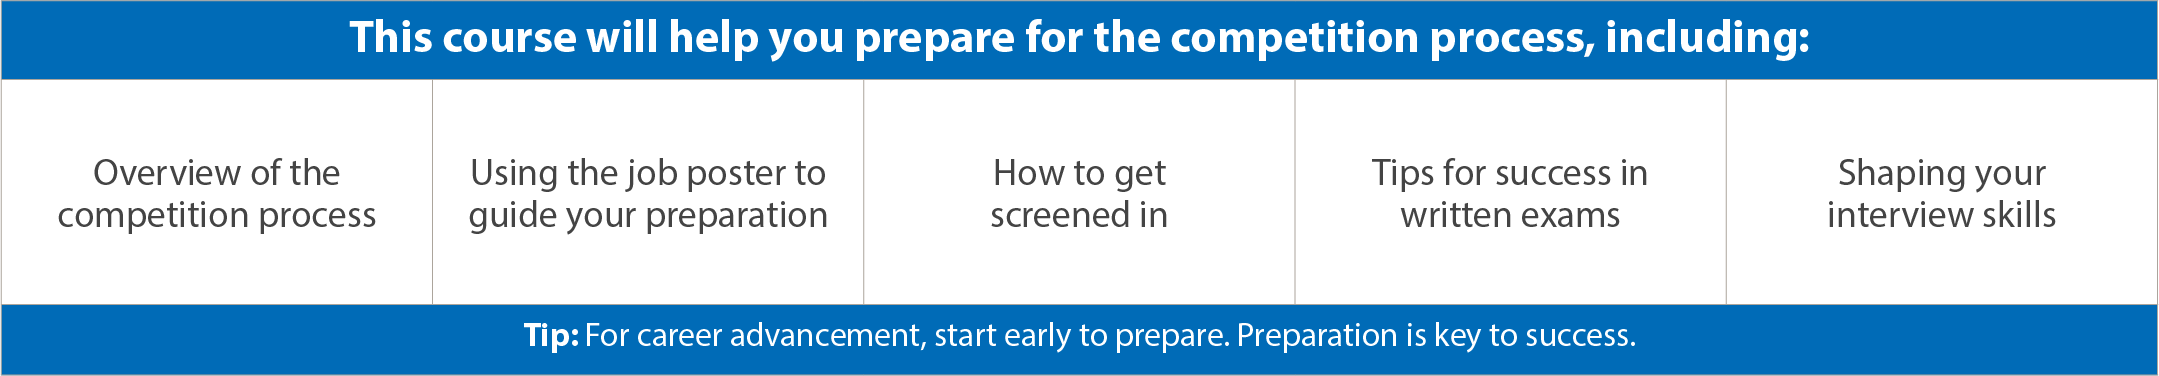 This course will help you prepare for the competition process, including: